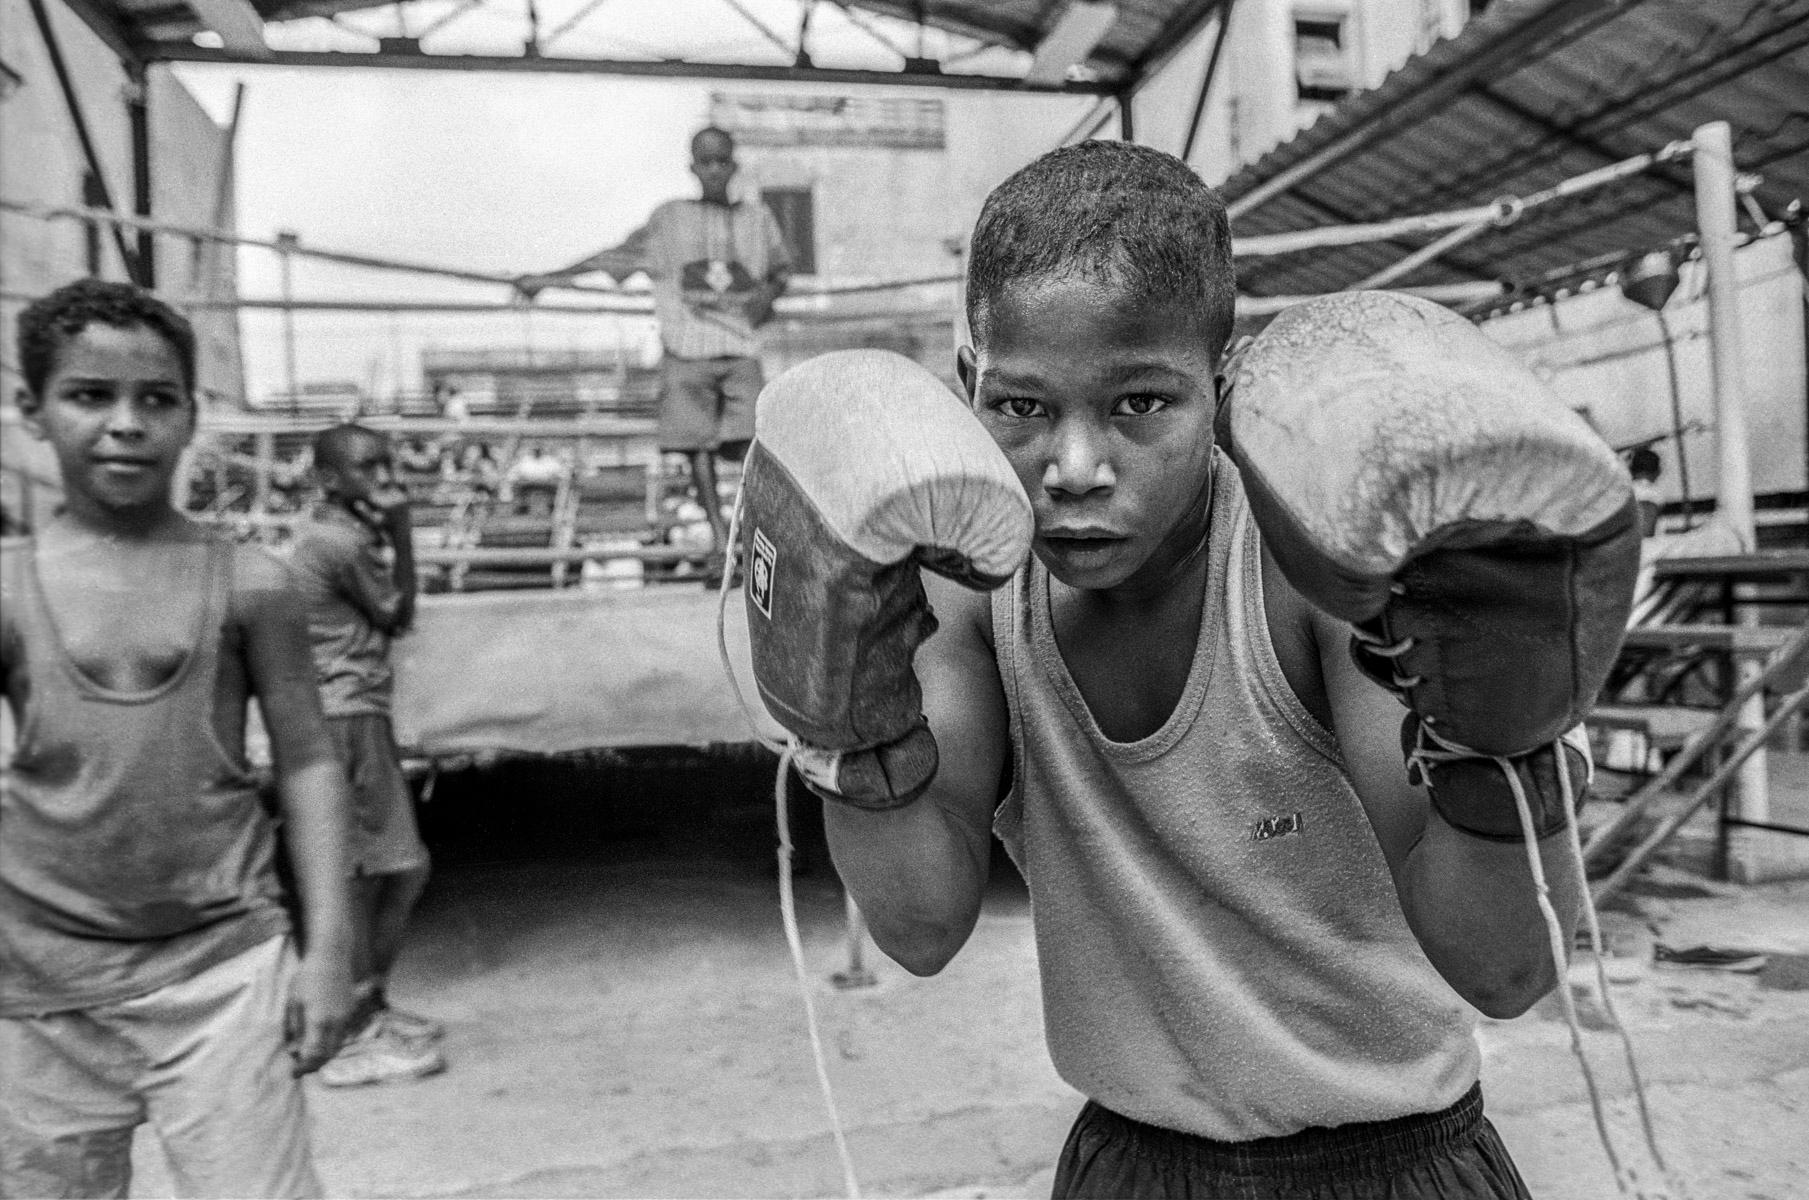 El Principe - the little prince.  The Raphael Trejo gym is an institution of Old Havana. An open air gym that has produced world beating champions from bare-footed initiates.  In 2004 this boy was a star in the making... he went on to win medals in